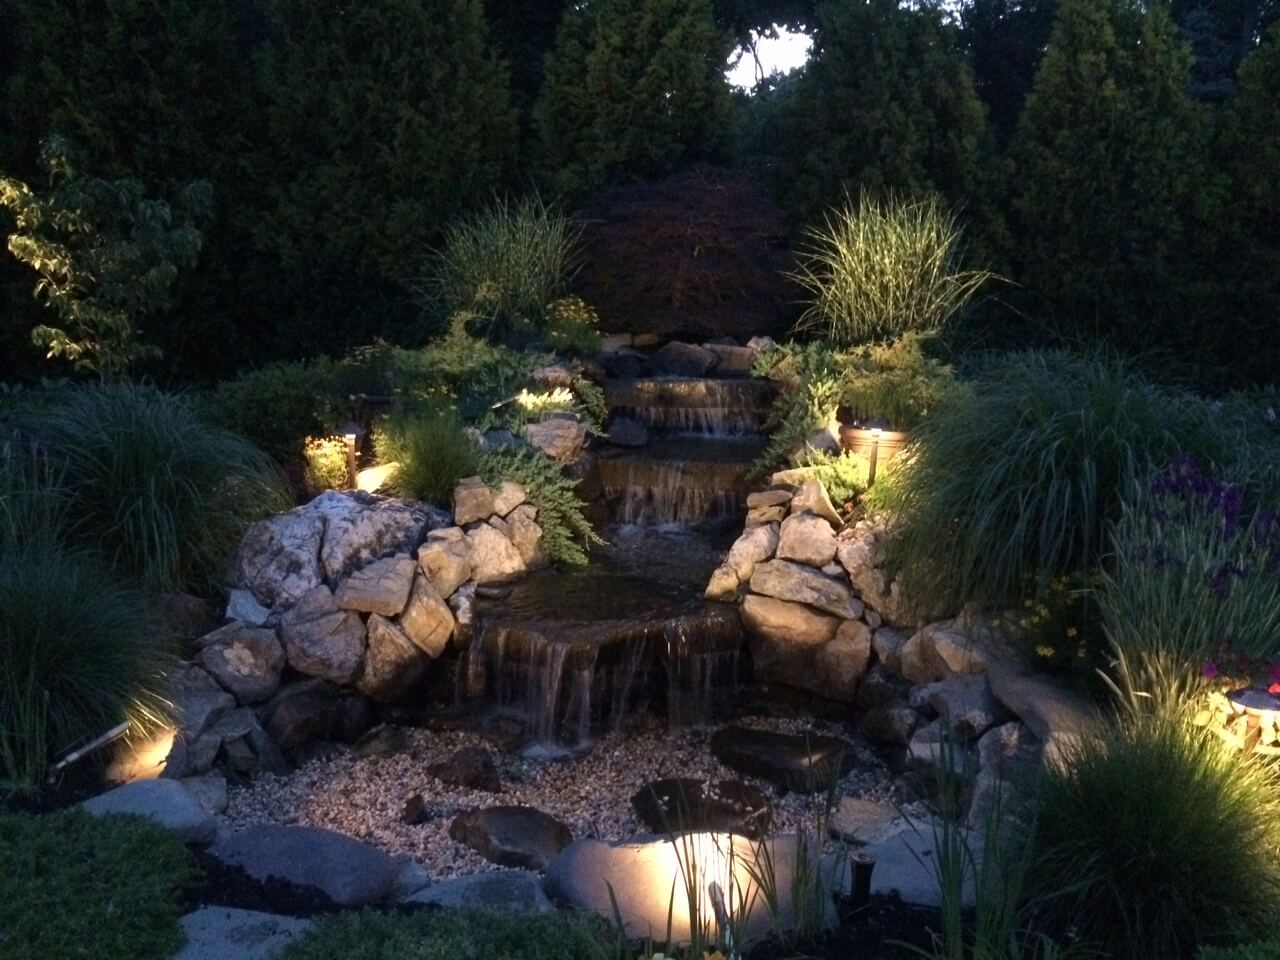 Water Feature and Landscape Lighting